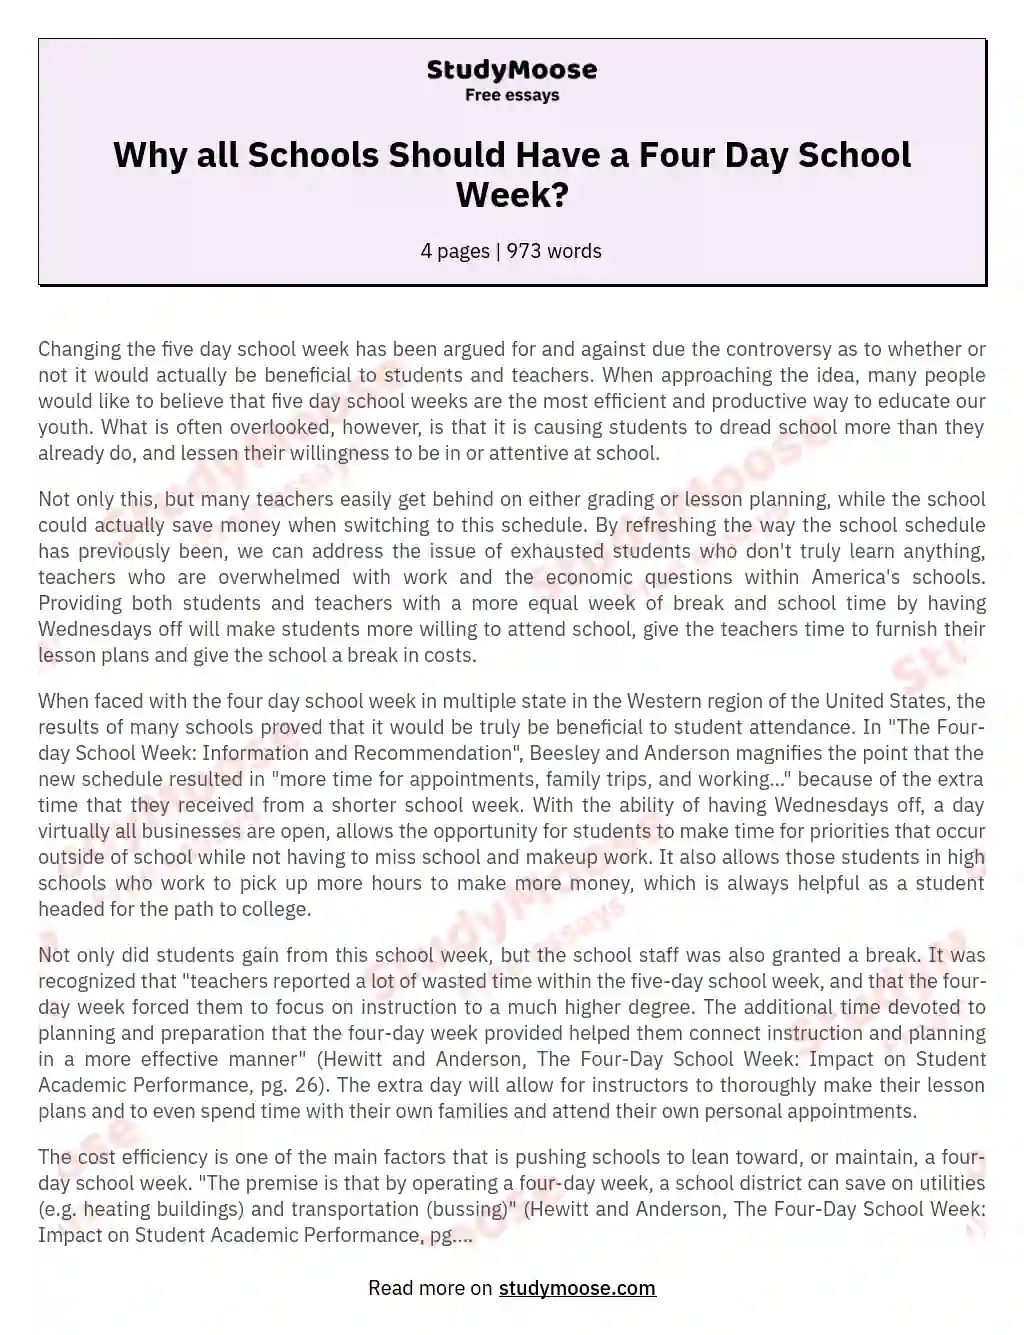 Why all Schools Should Have a Four Day School Week? essay